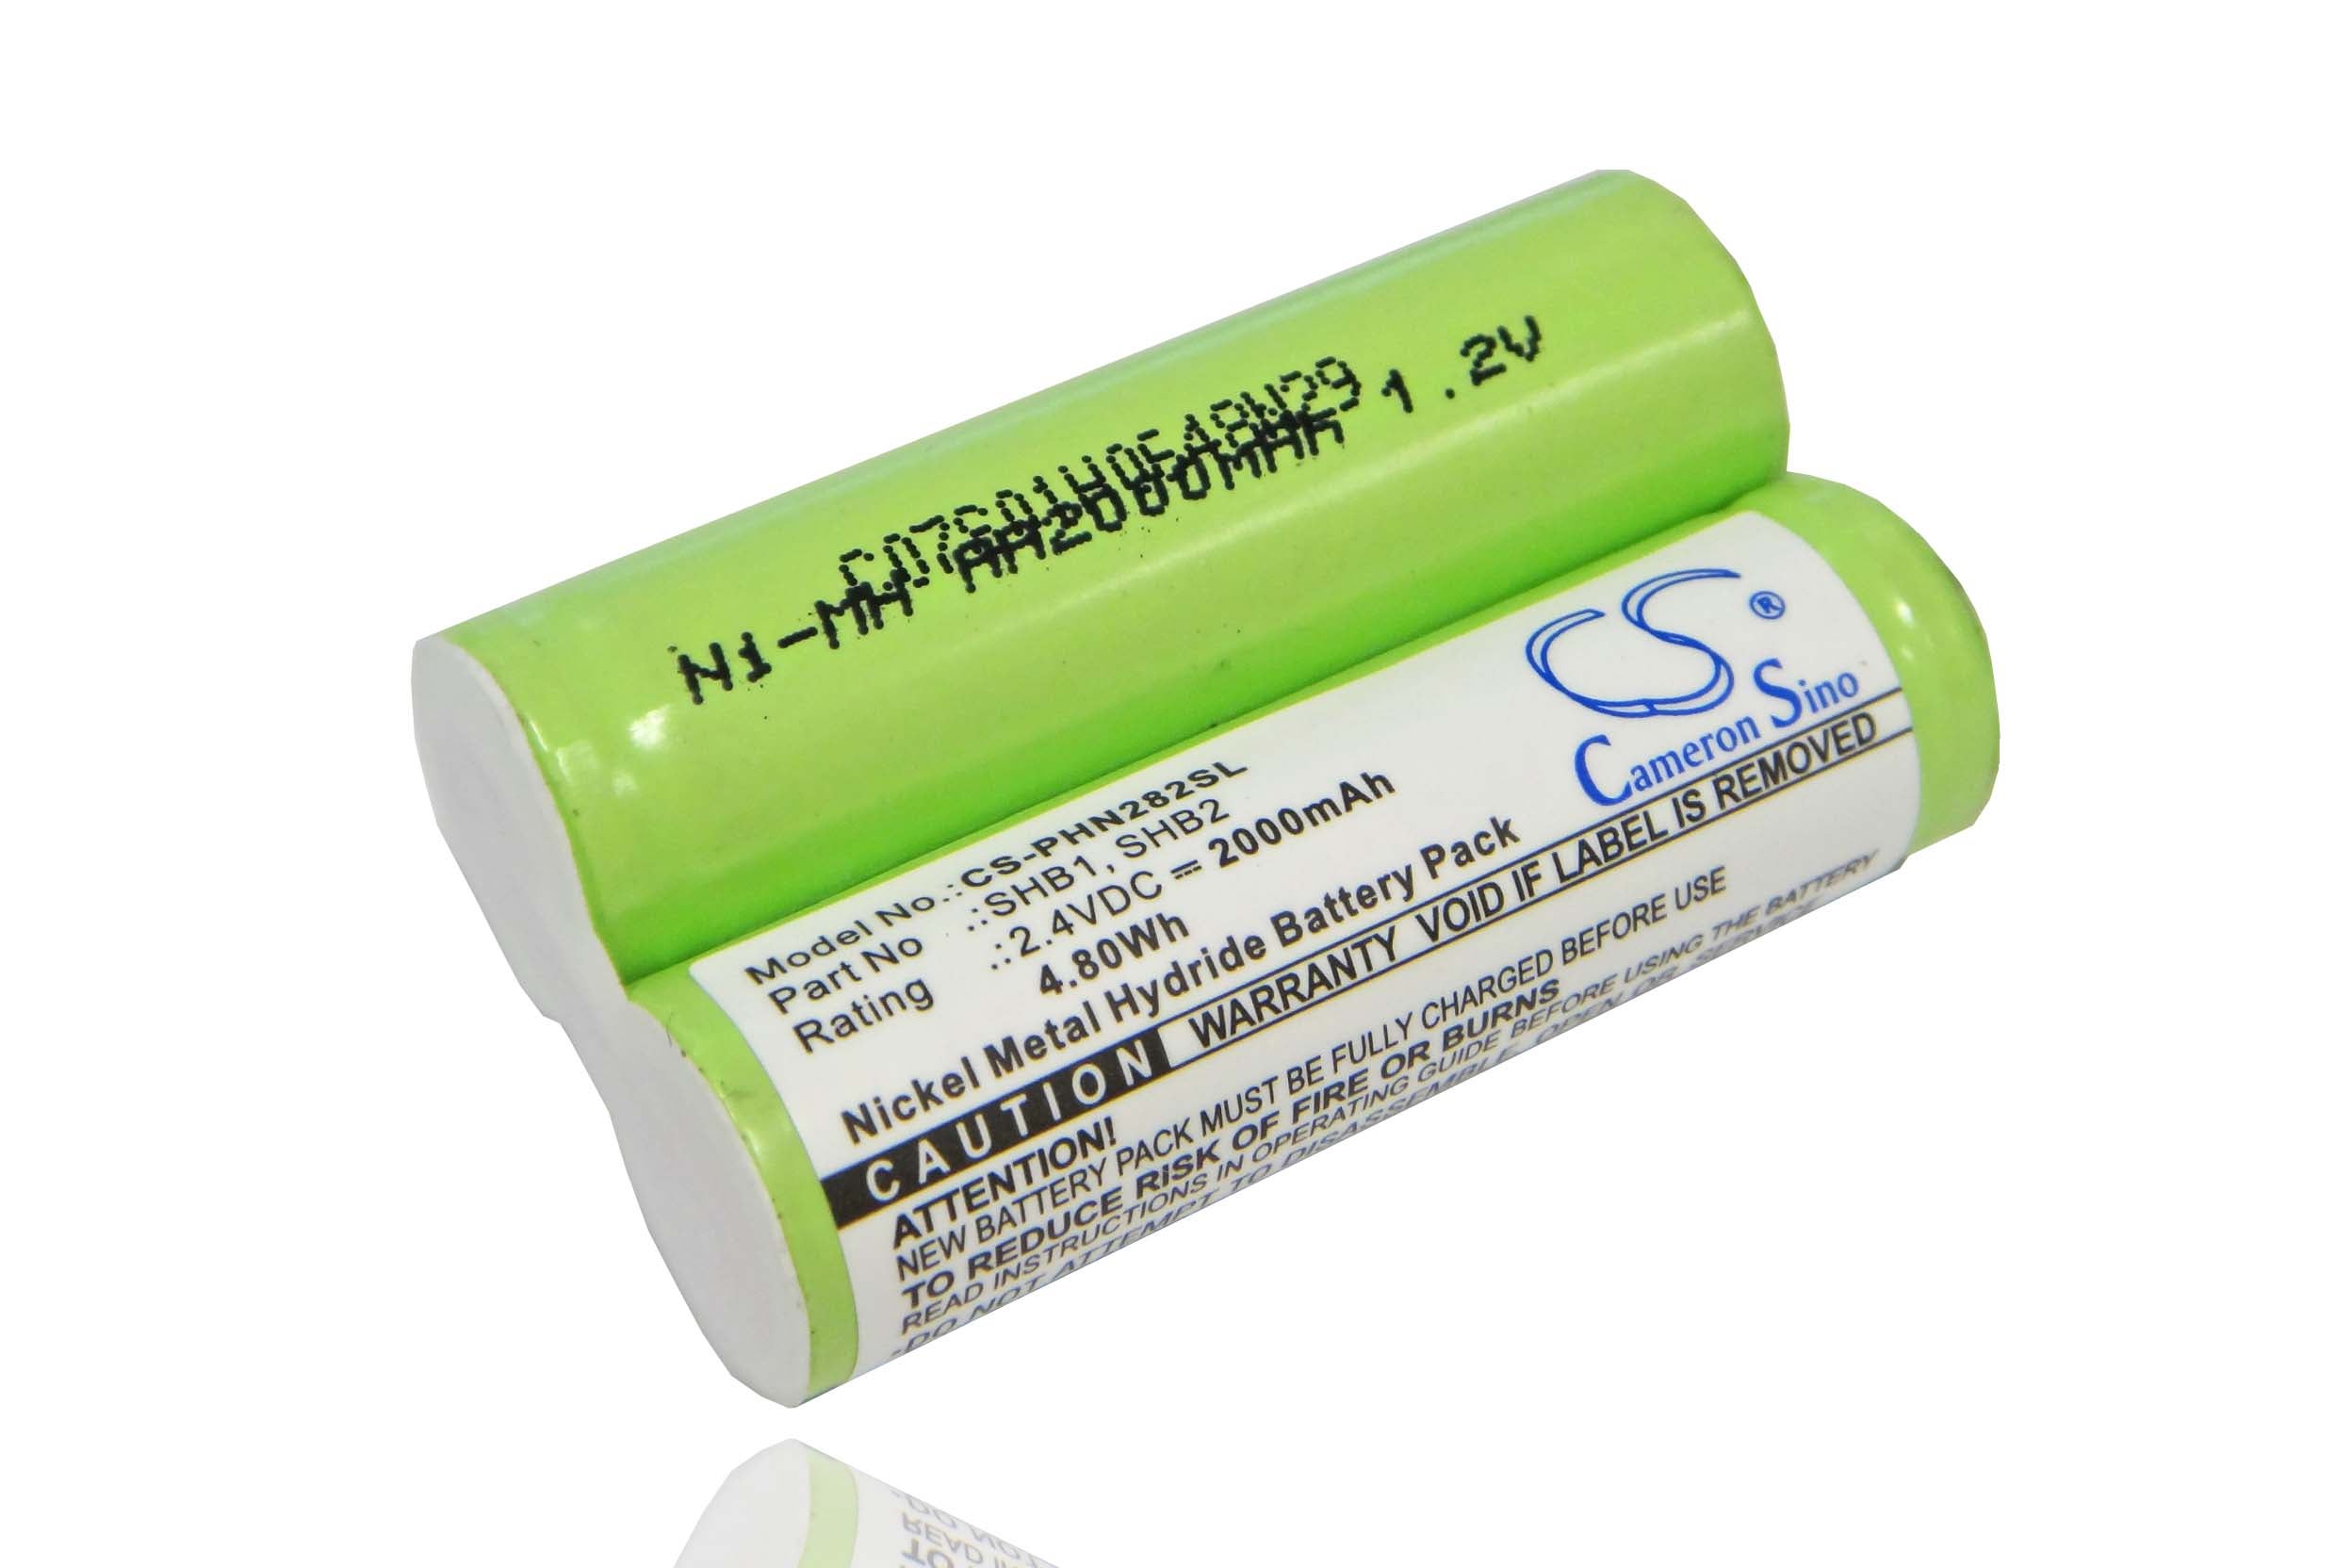 Camelion AAA Micro 1100 mAh batterie 2 pièces Chargeable Pour Telekom Sinus 301 